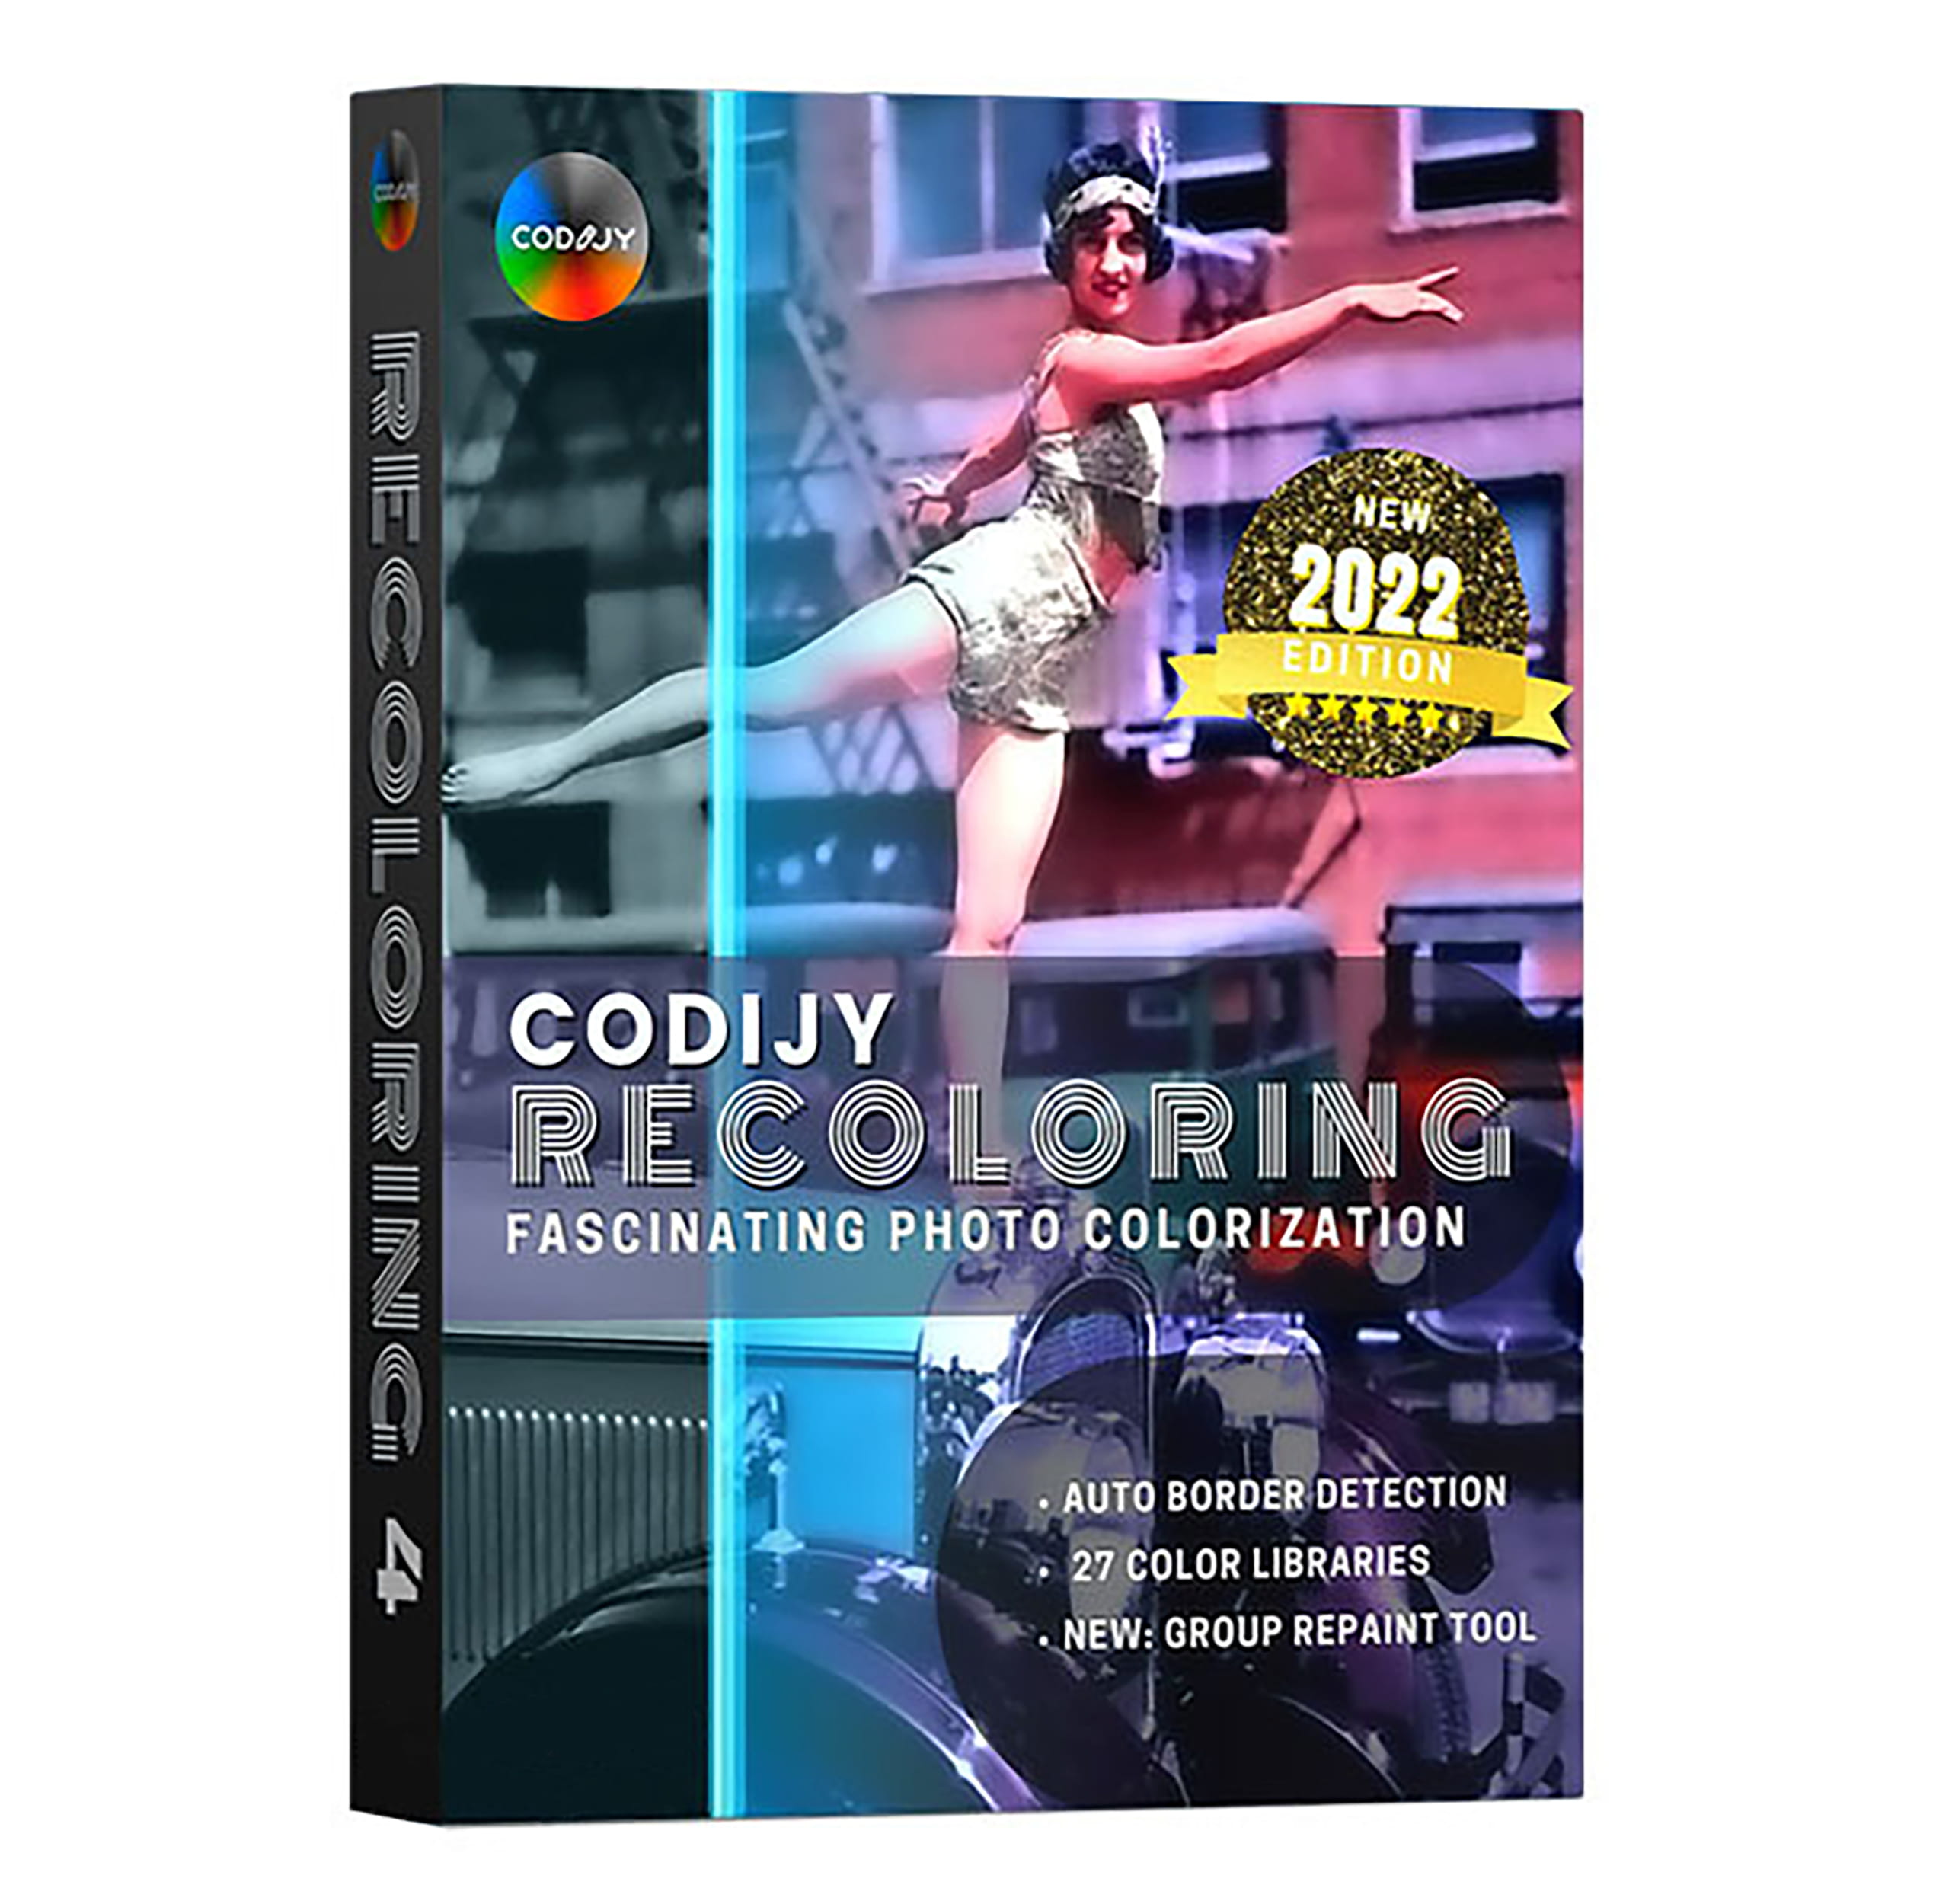 CODIJY Recoloring 4.2.0 download the last version for ipod